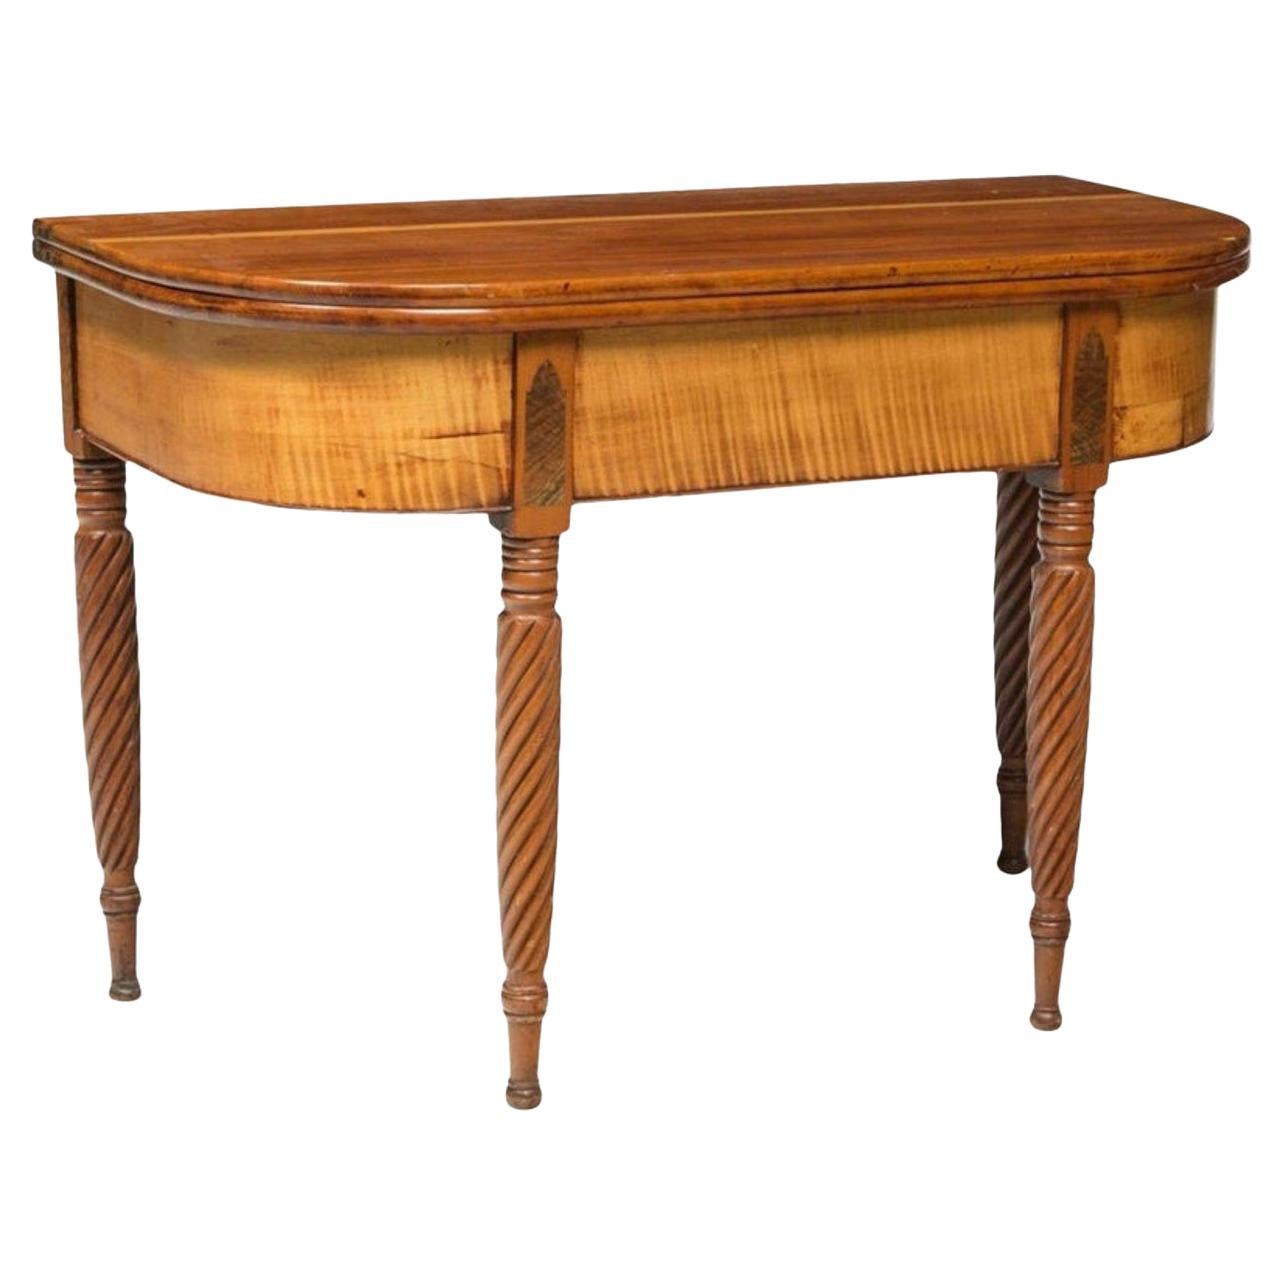 Period Baltimore Classical Curly Maple Console Games Table For Sale